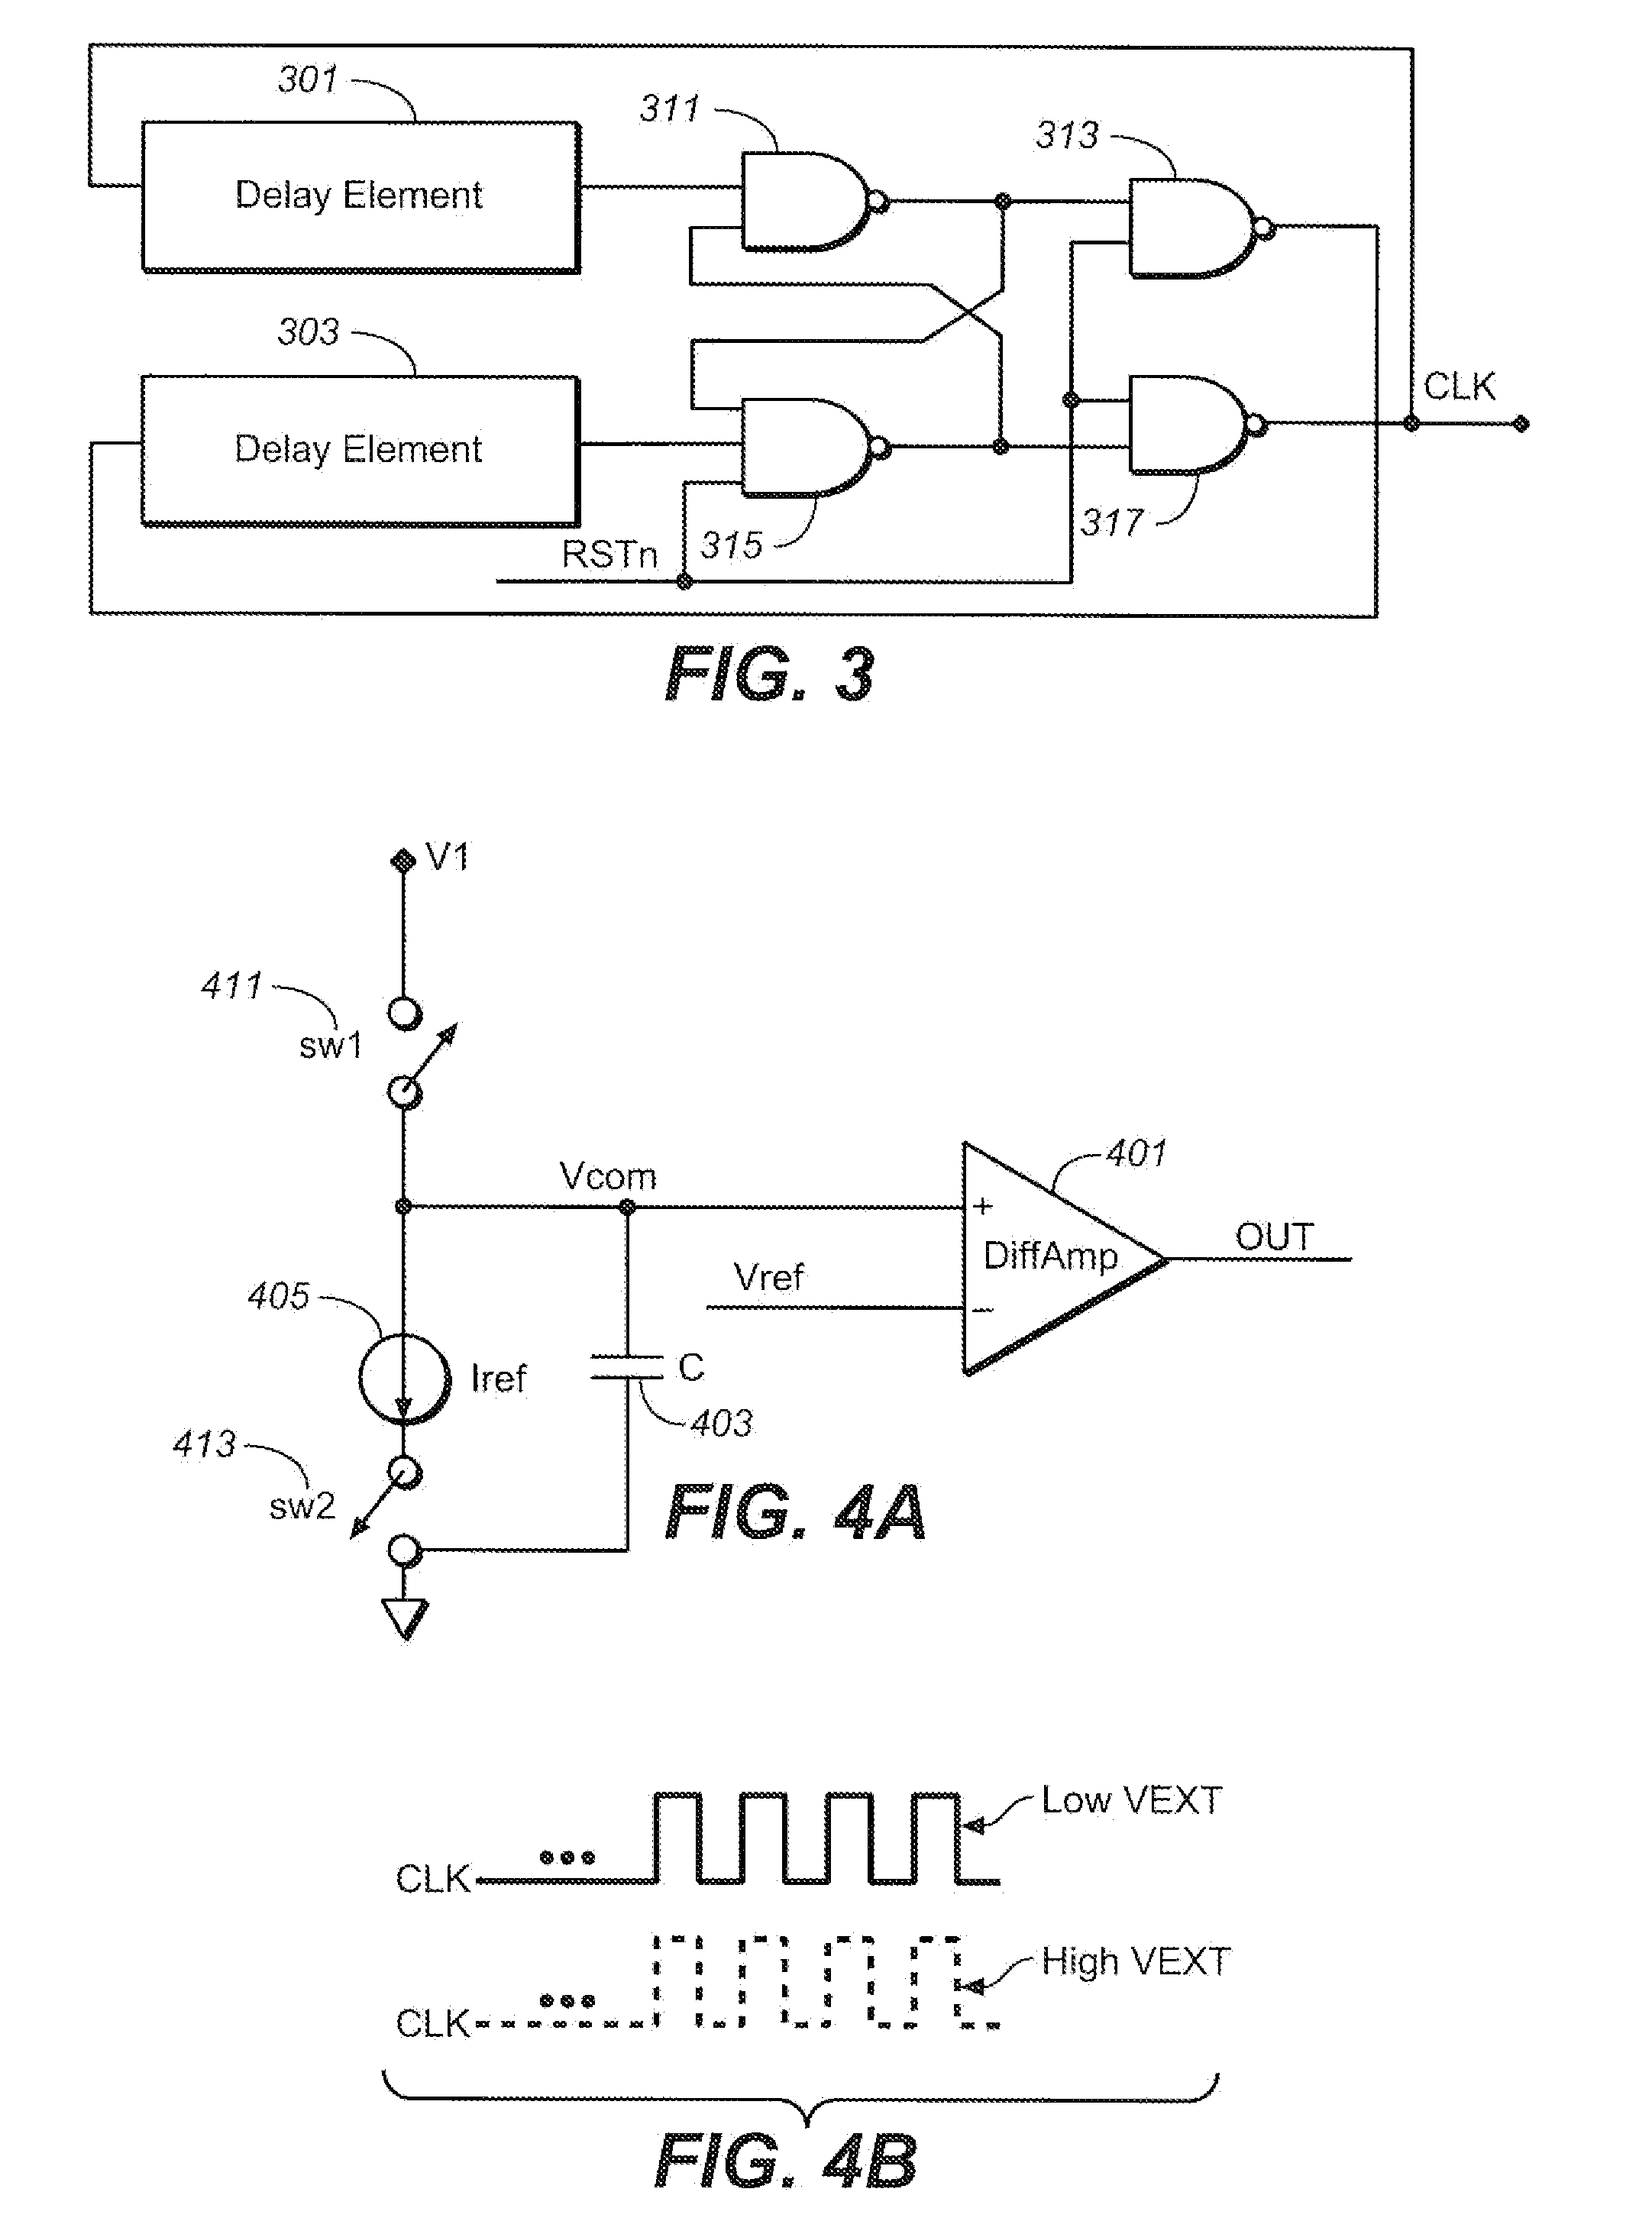 Clock Generator Circuit for a Charge Pump